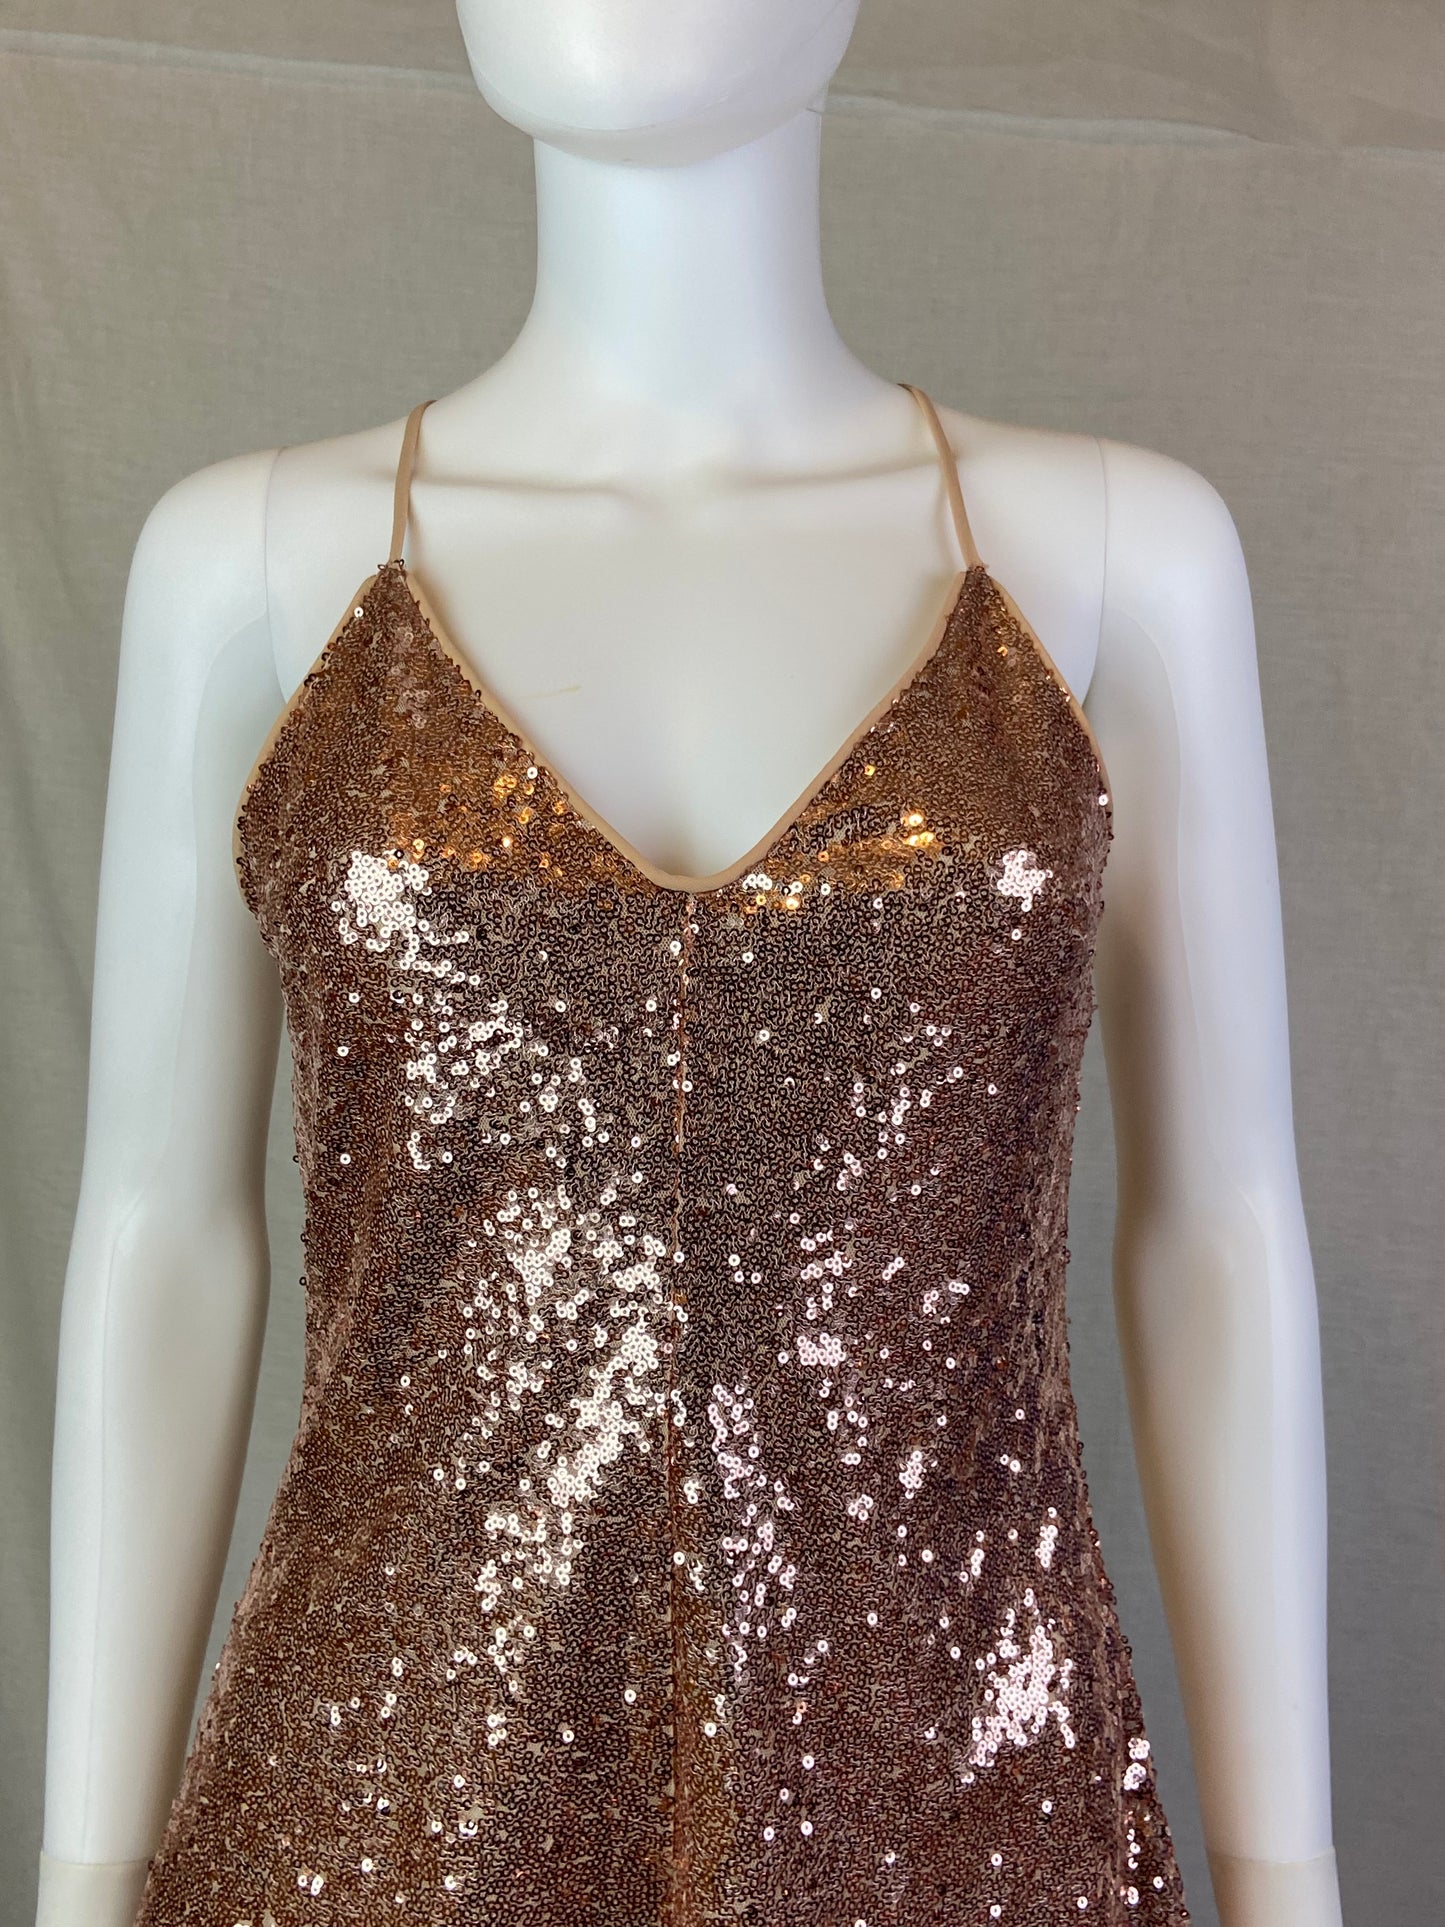 Forever 21 Champagne Gold Sequin Cocktail Shorts Romper